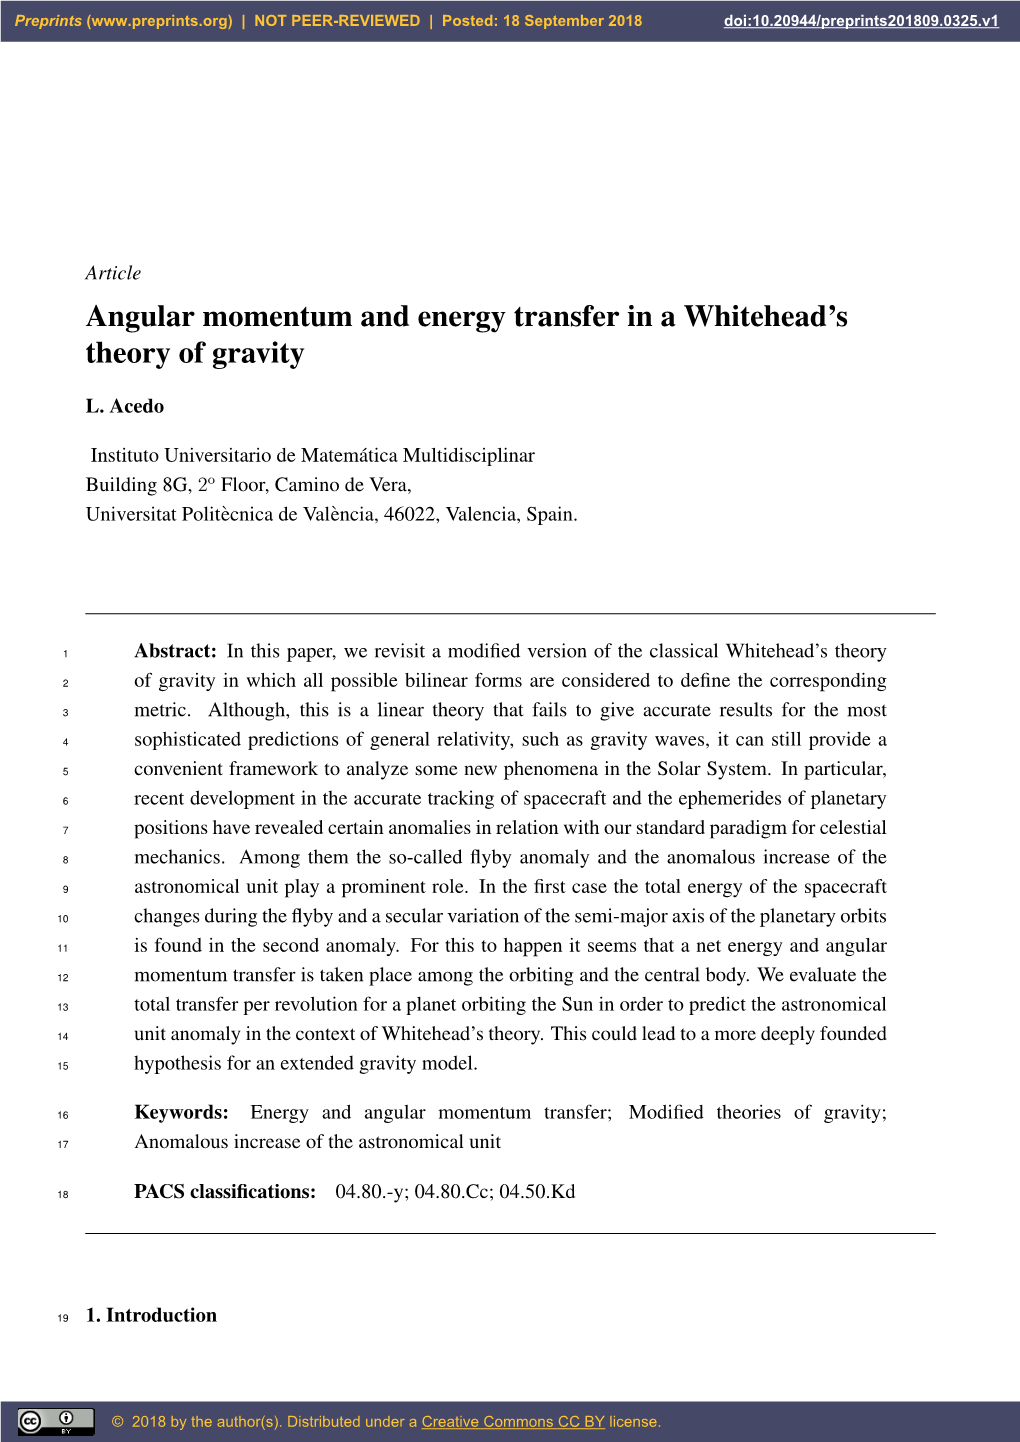 Angular Momentum and Energy Transfer in a Whitehead's Theory Of